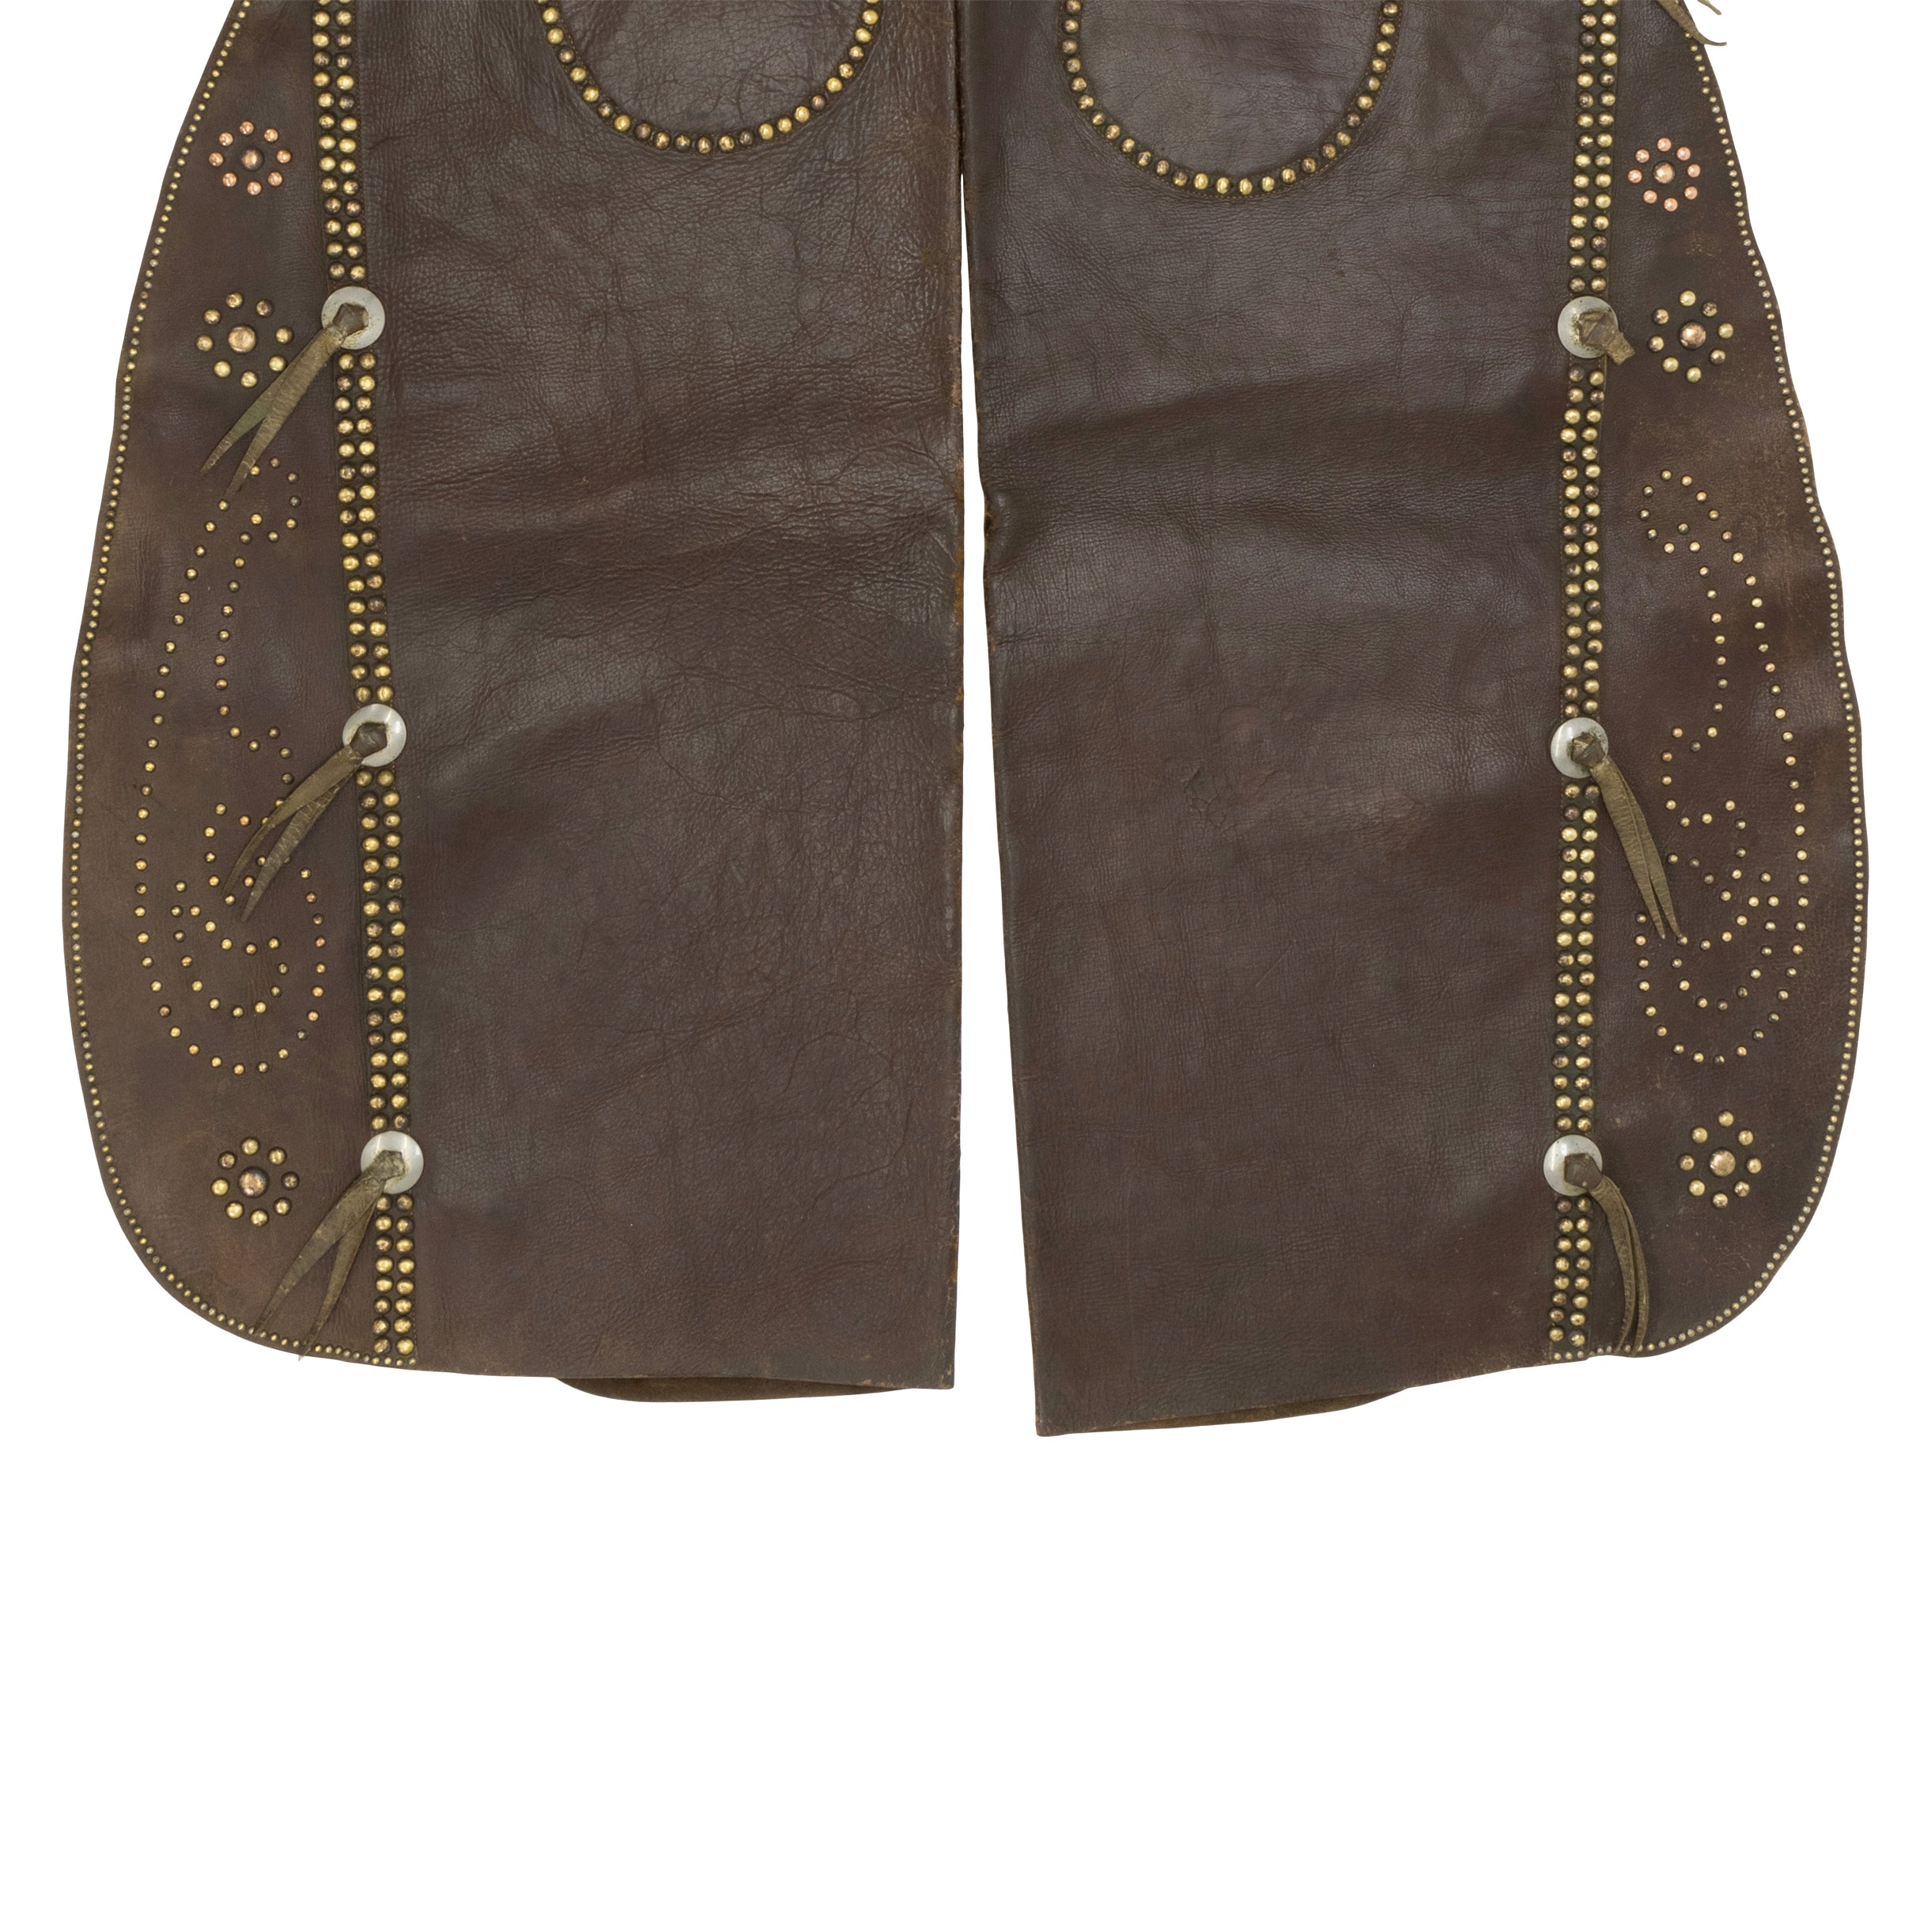 Studded Batwing Chaps